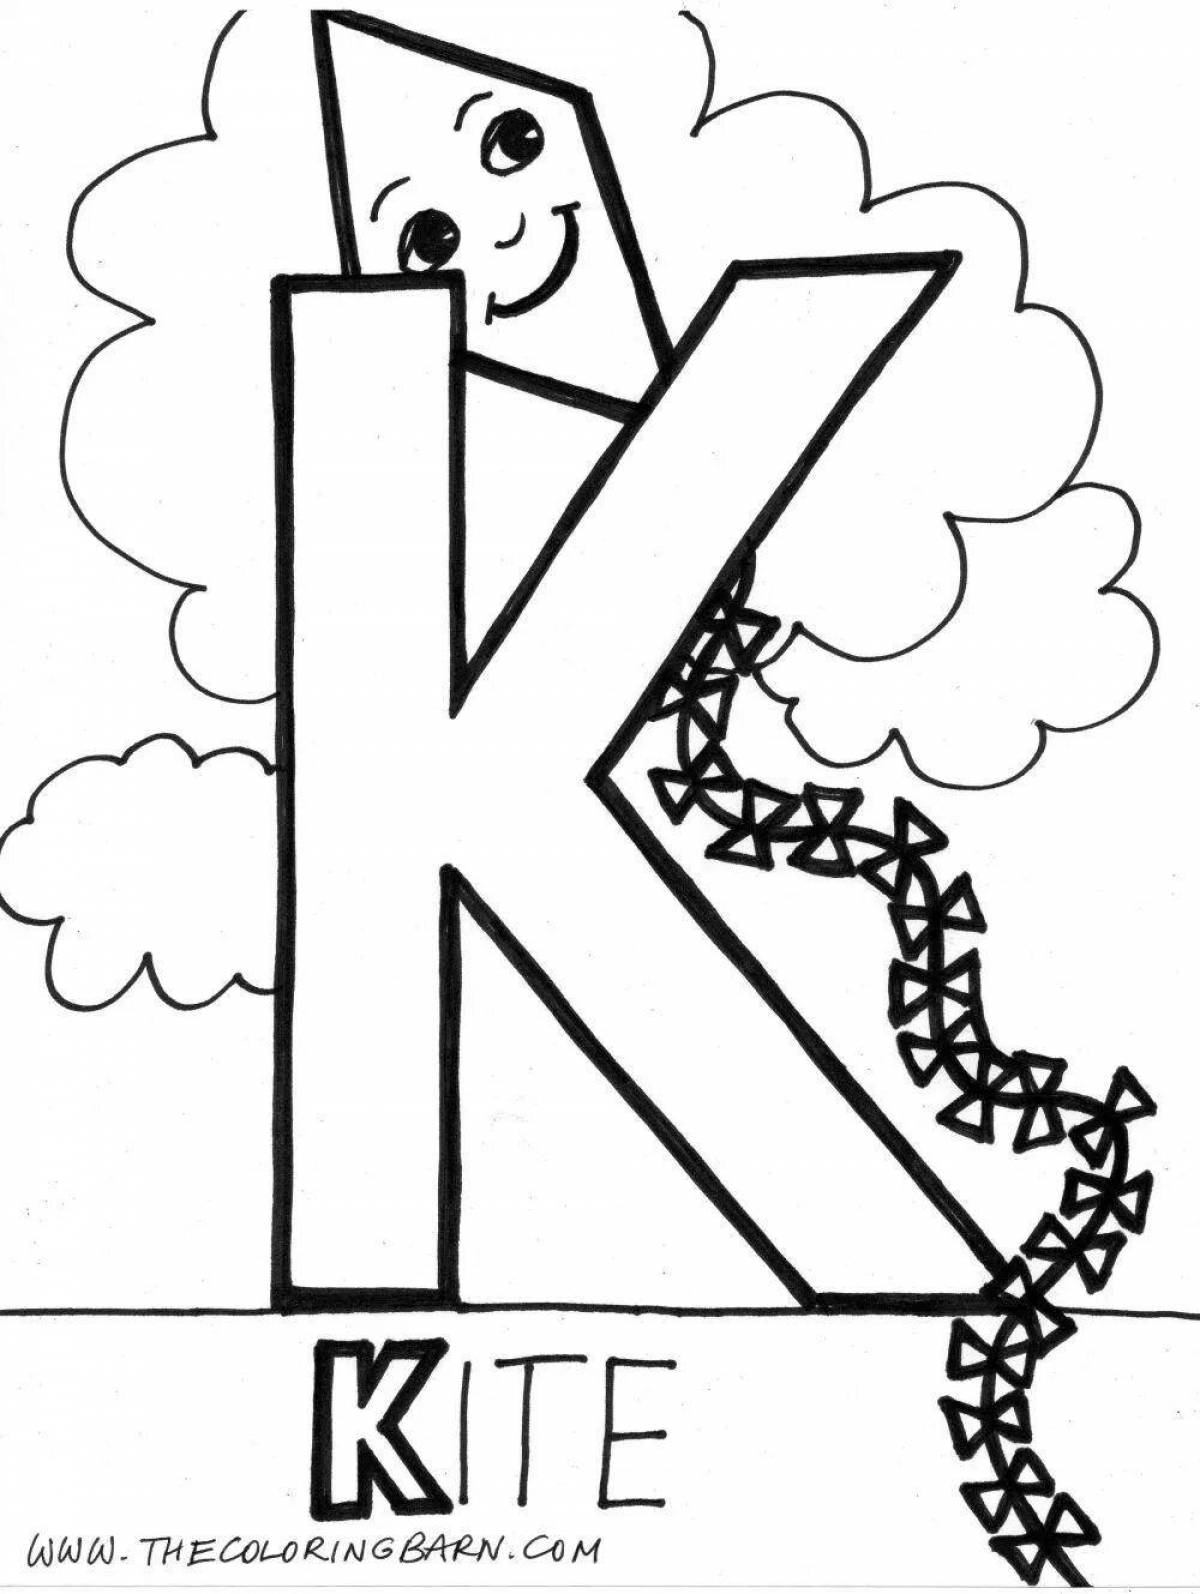 Glowing letter k coloring page